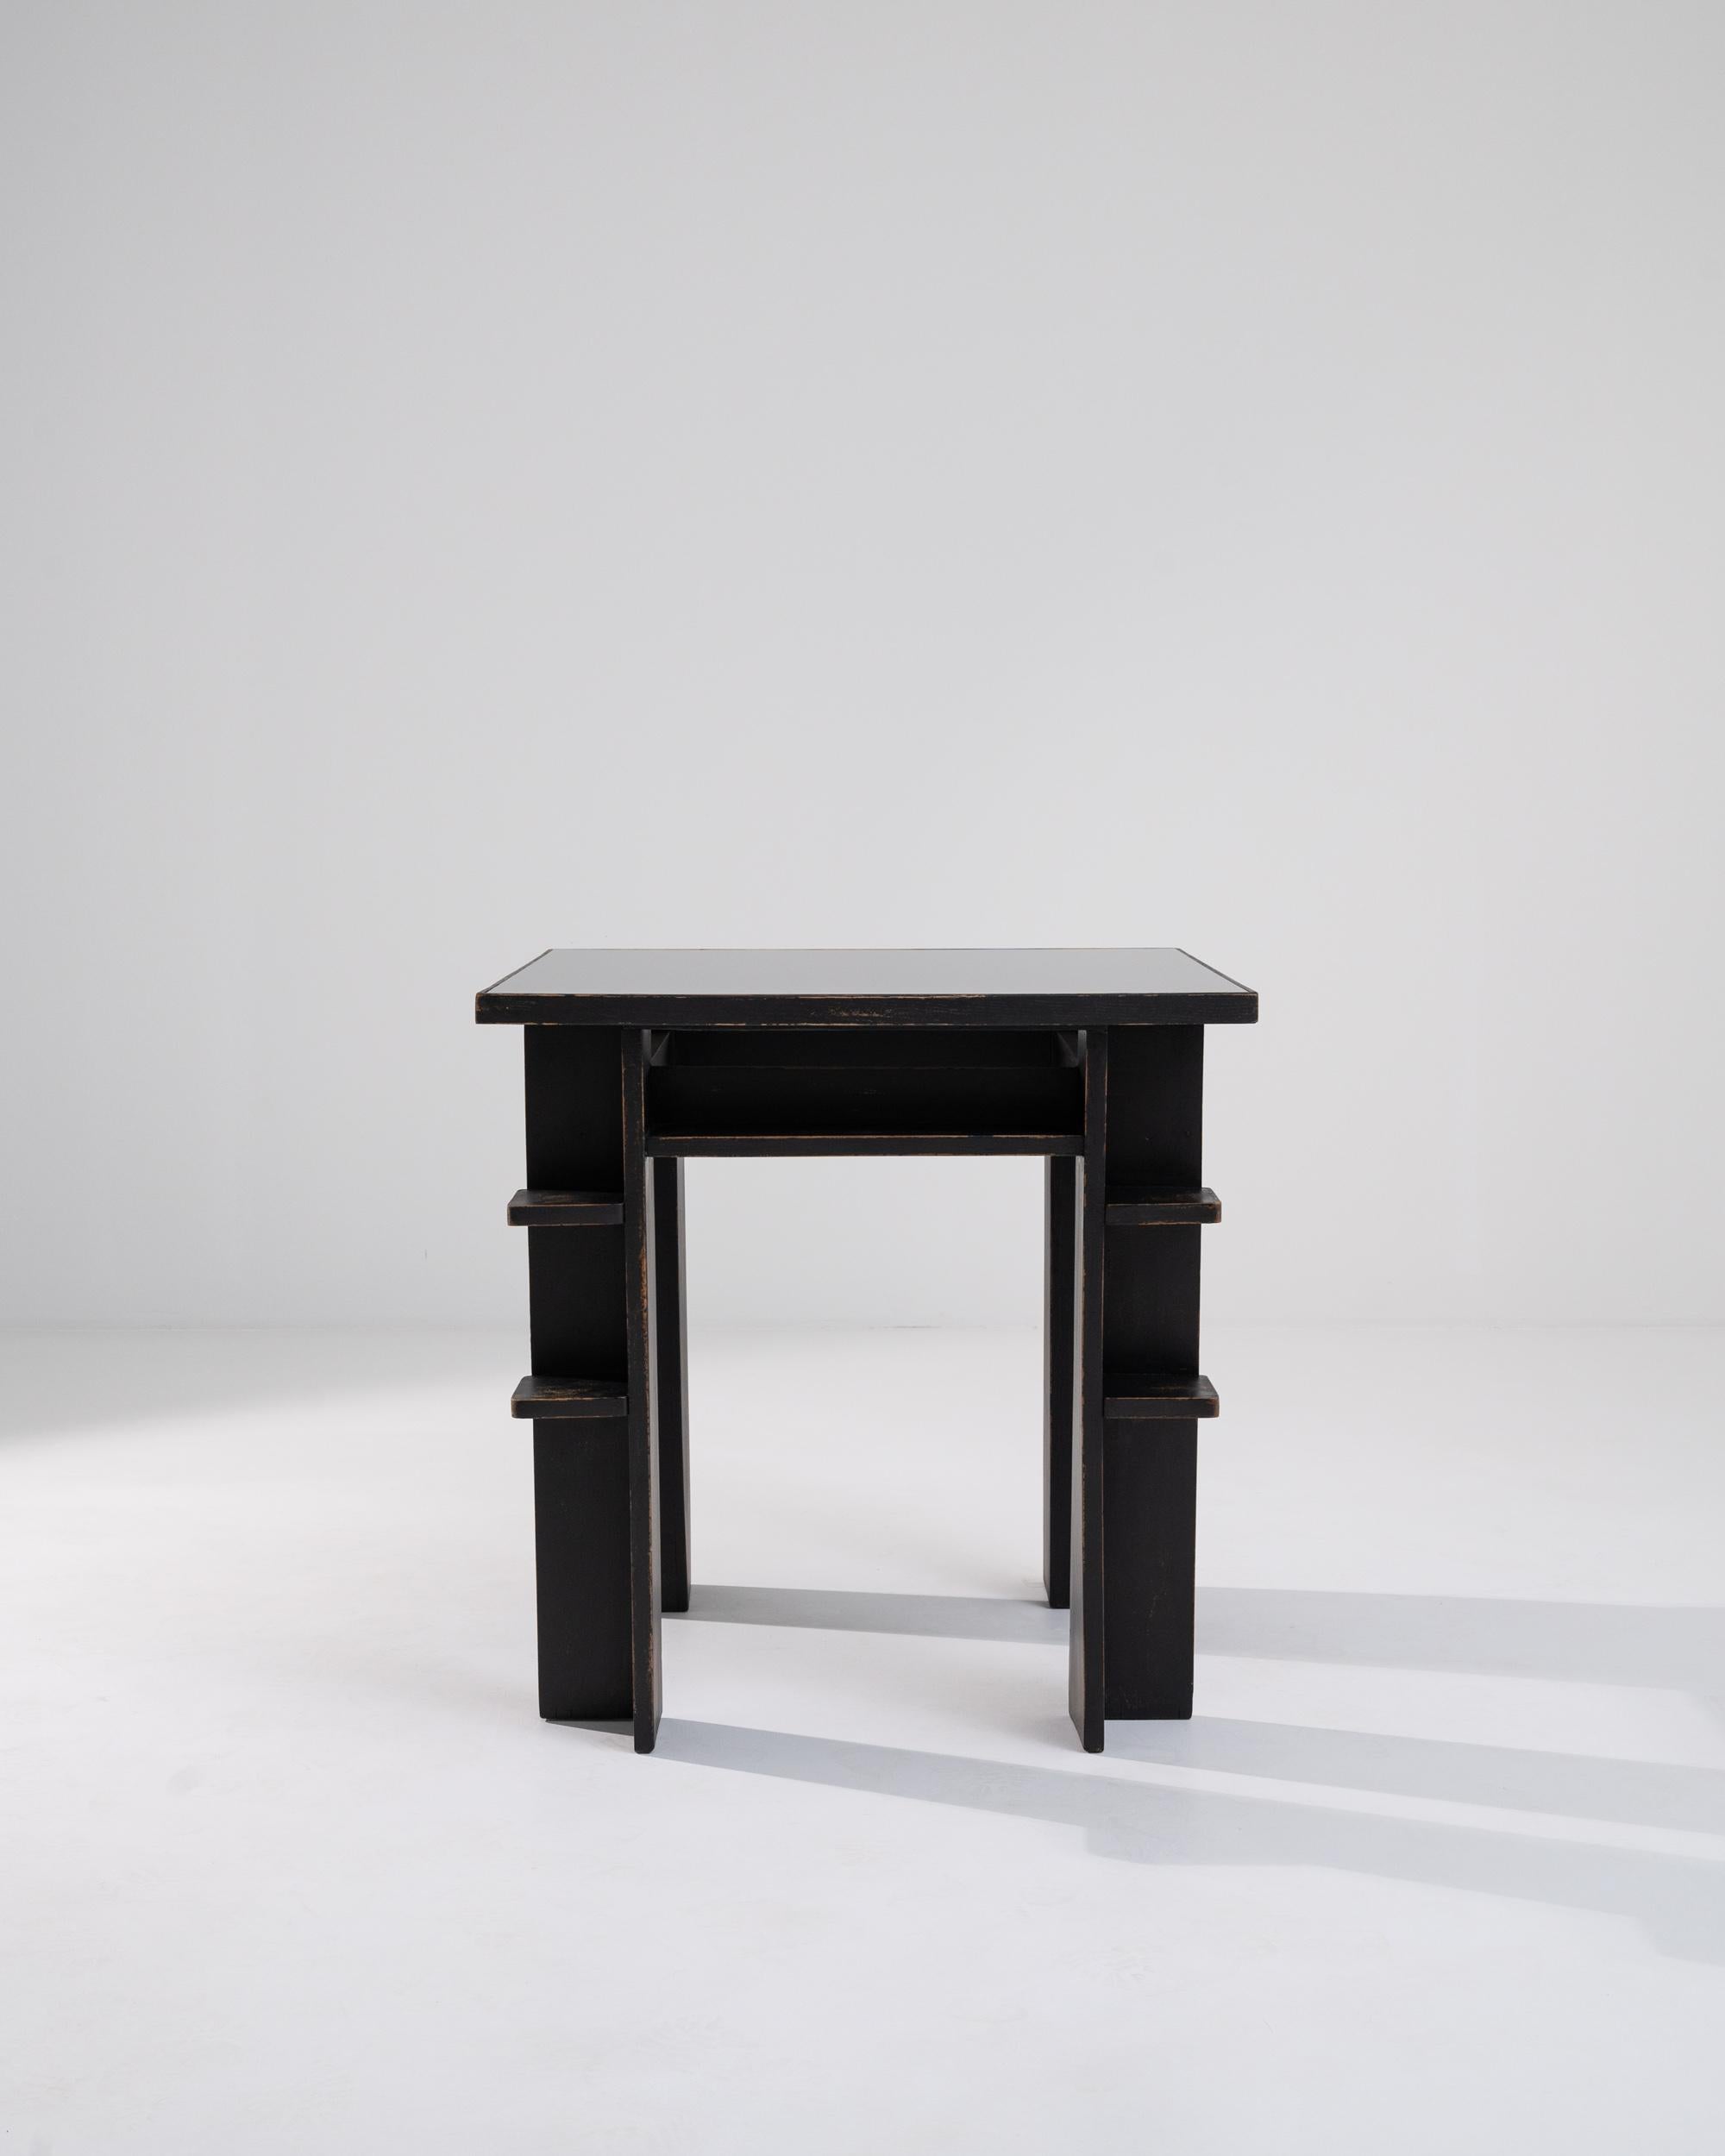 A wooden table with a glass top created in 20th century France. This minimal side table is designed in an early Modern style, constructed by right-angled legs slotted with curious little shelves. A rich coat of black paint has been slowly worn away